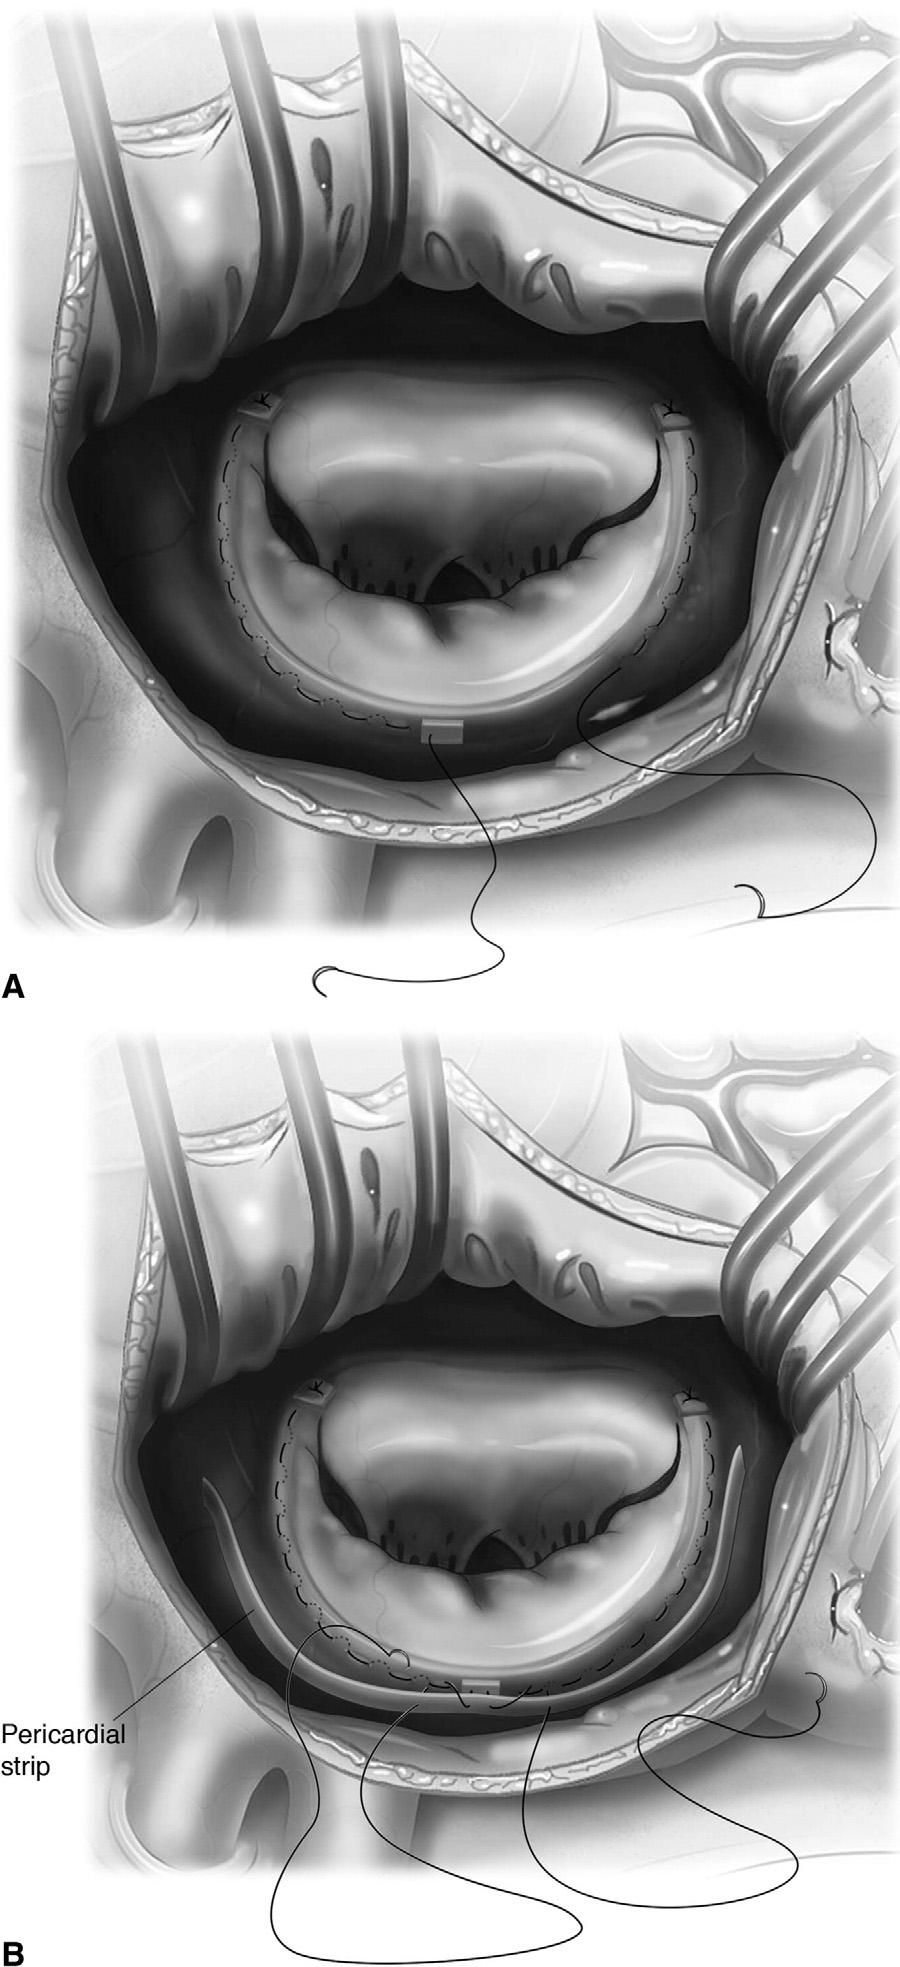 268 R. Hetzer and E.M. Delmo Walter Figure 8 For children and adolescents with severely dilated annulus. A severely dilated annulus is best operated on with a modified Paneth- Hetzer technique.